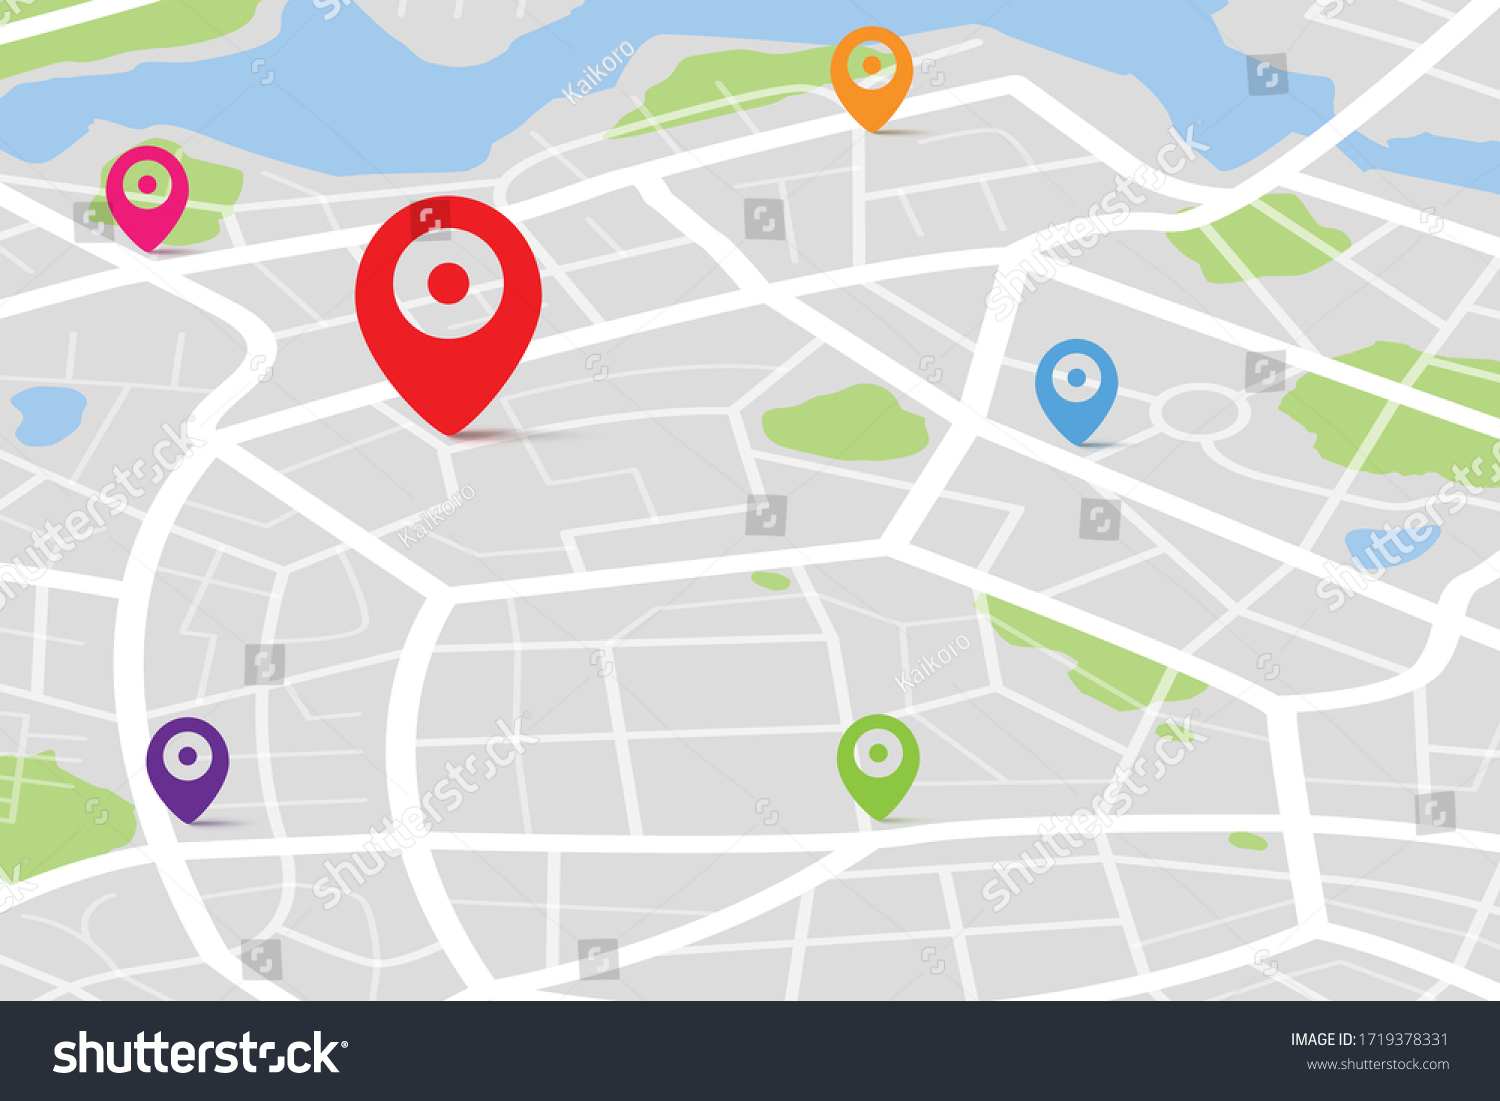 3D Isometric map with destination location point, Aerial clean top view of the day time city map with street and river, Blank urban imagination map, GPS map navigator concept, vector illustration #1719378331